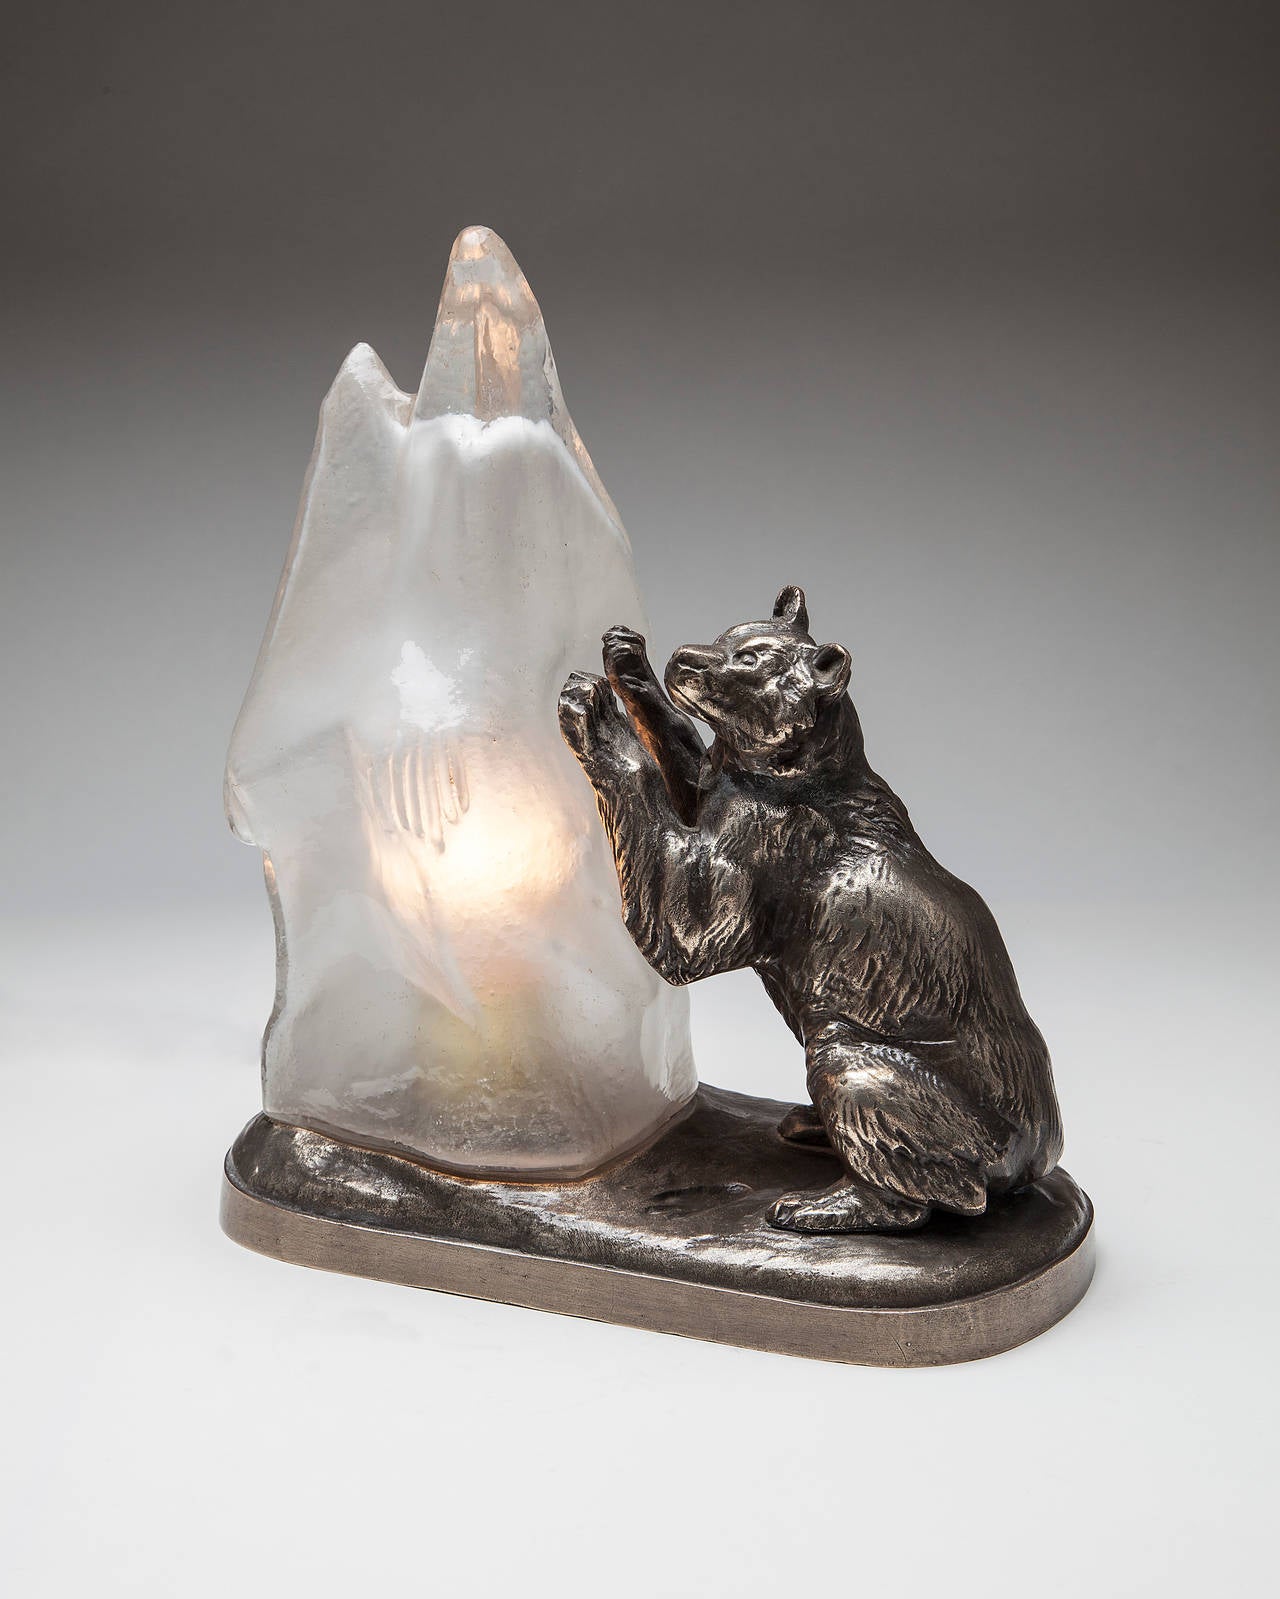 Charming pair of French metal lamps with polar bears playing with glass iceberg shades. Each is marked Paris Fabrication Francaise made in France on the back. Smaller one is also signed T. Cartier, circa 1930.
Dimensions: The largest one is 13